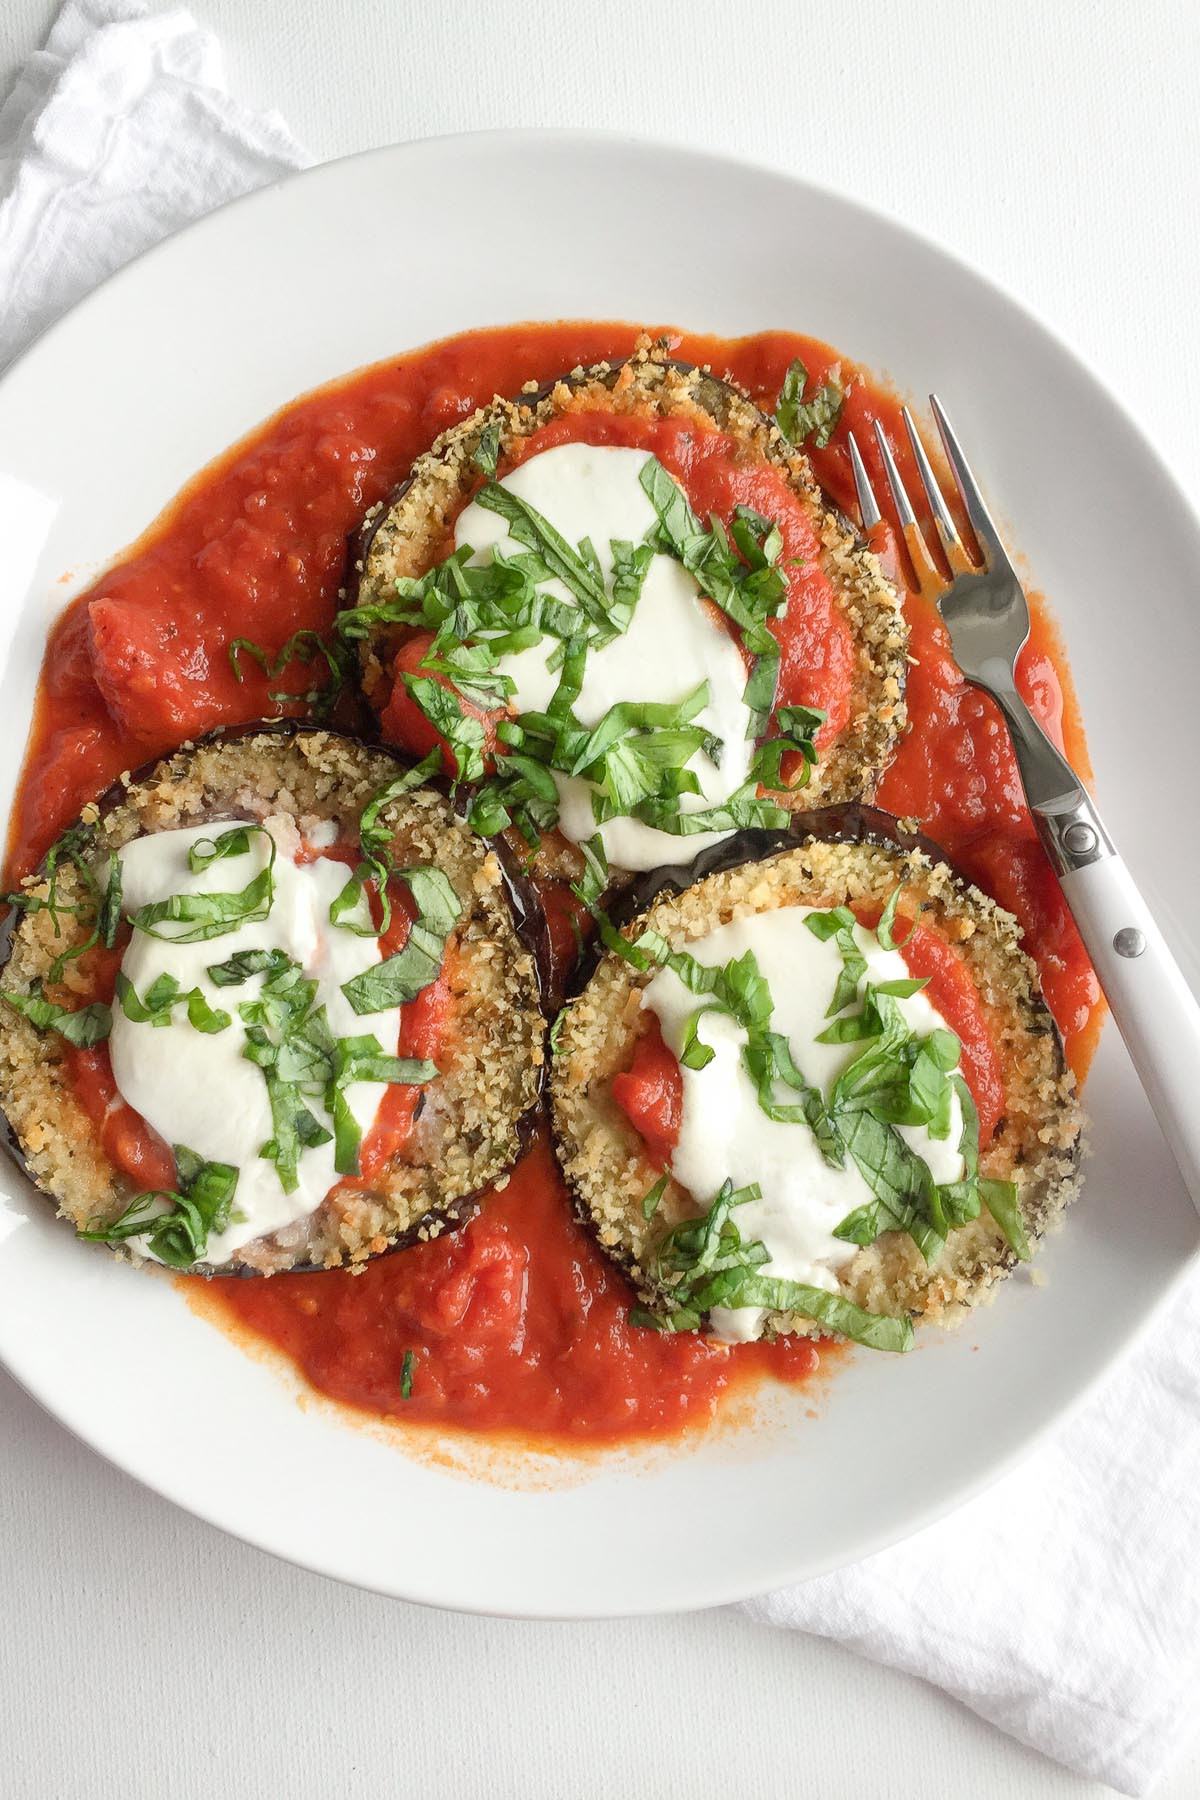 Healthy Eggplant Recipes Awesome Healthy Baked Eggplant Parmesan Recipe